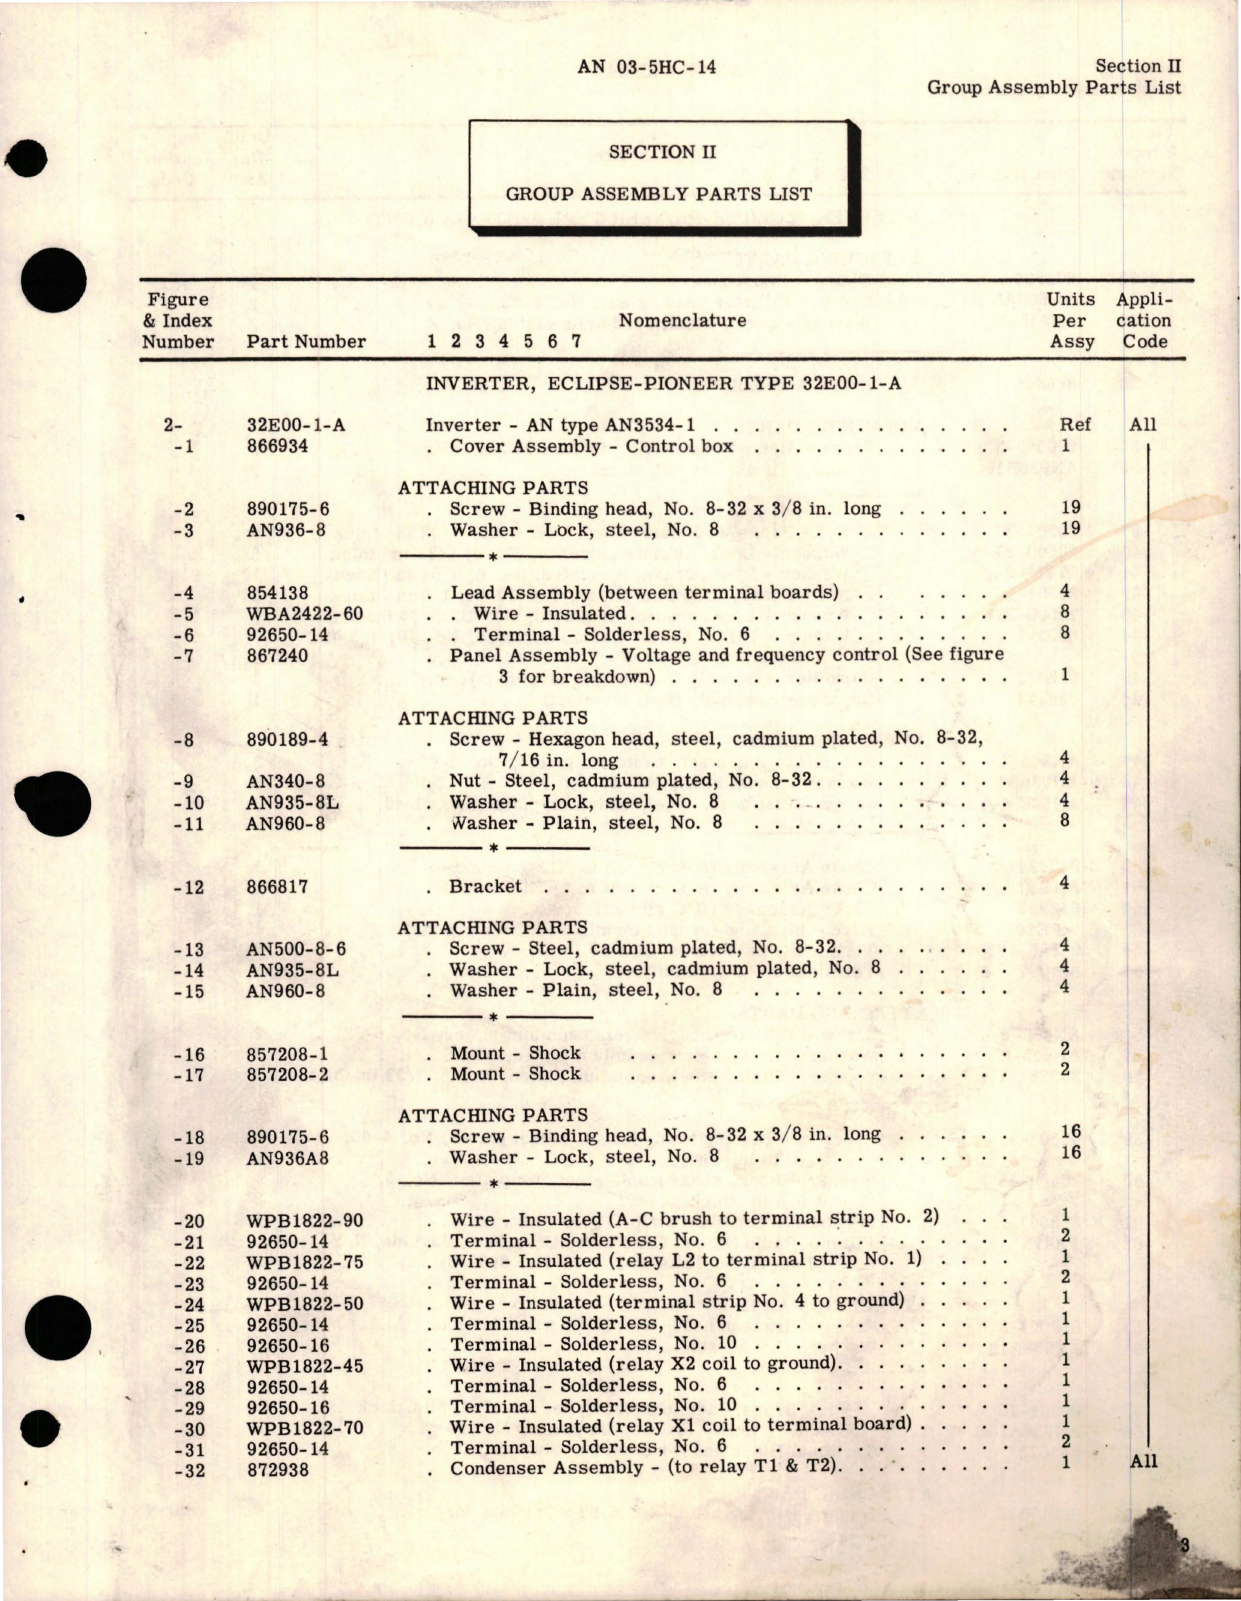 Sample page 7 from AirCorps Library document: Parts Catalog for Inverter - Type AN-3534-1 - Part 32E00-1-A 